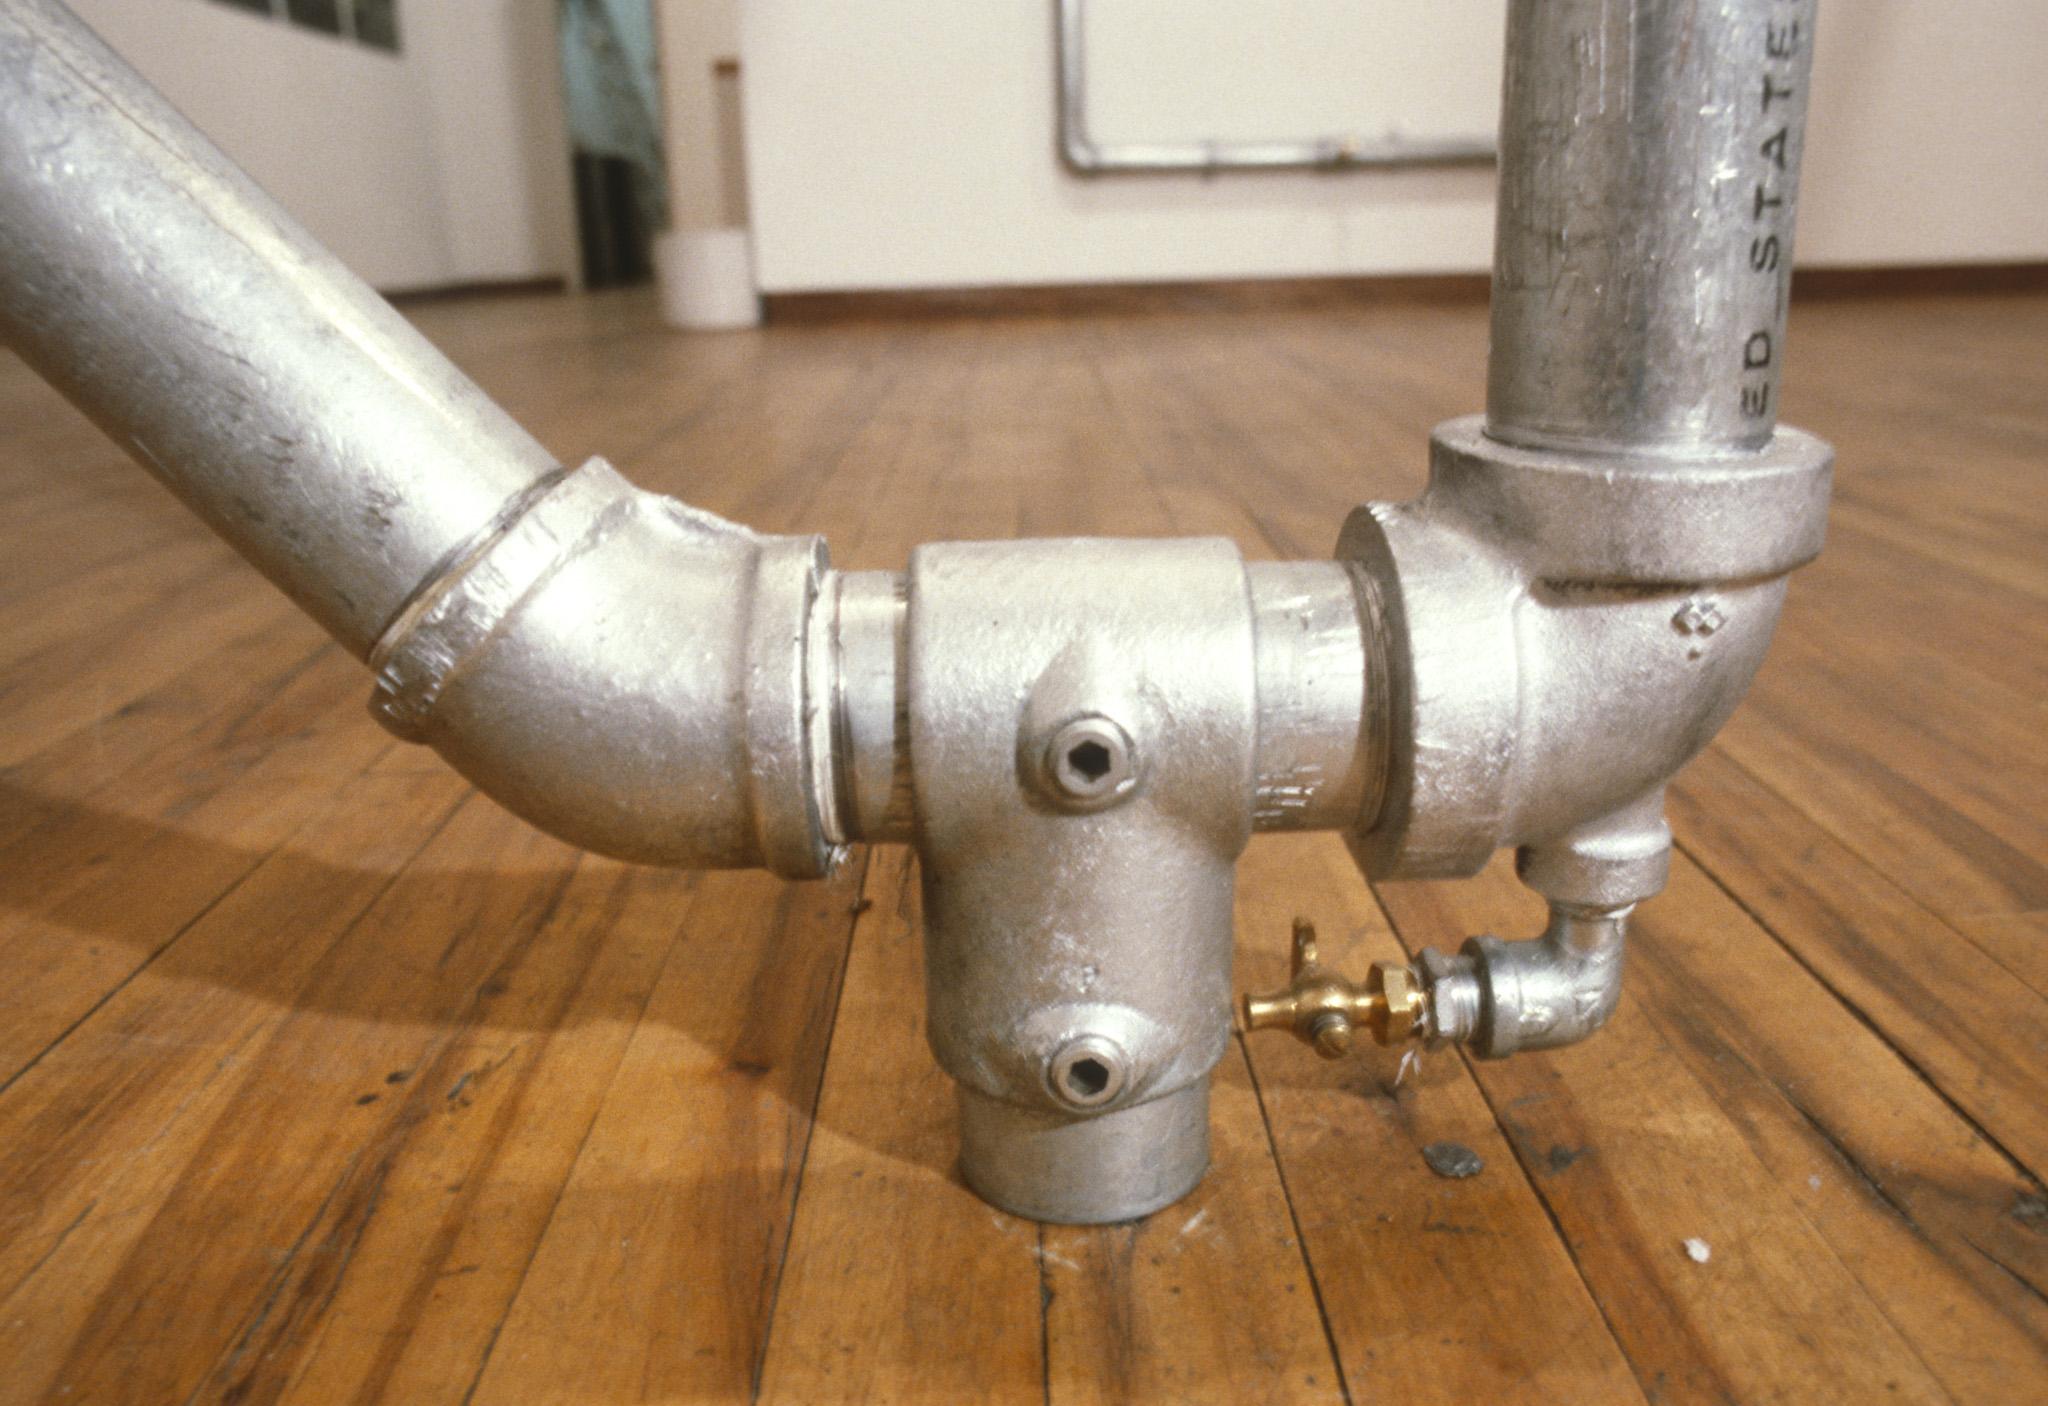 Nancy Holt's sculpture called Hot Water Heat made of hot water pipes in the John Weber Gallery in New York